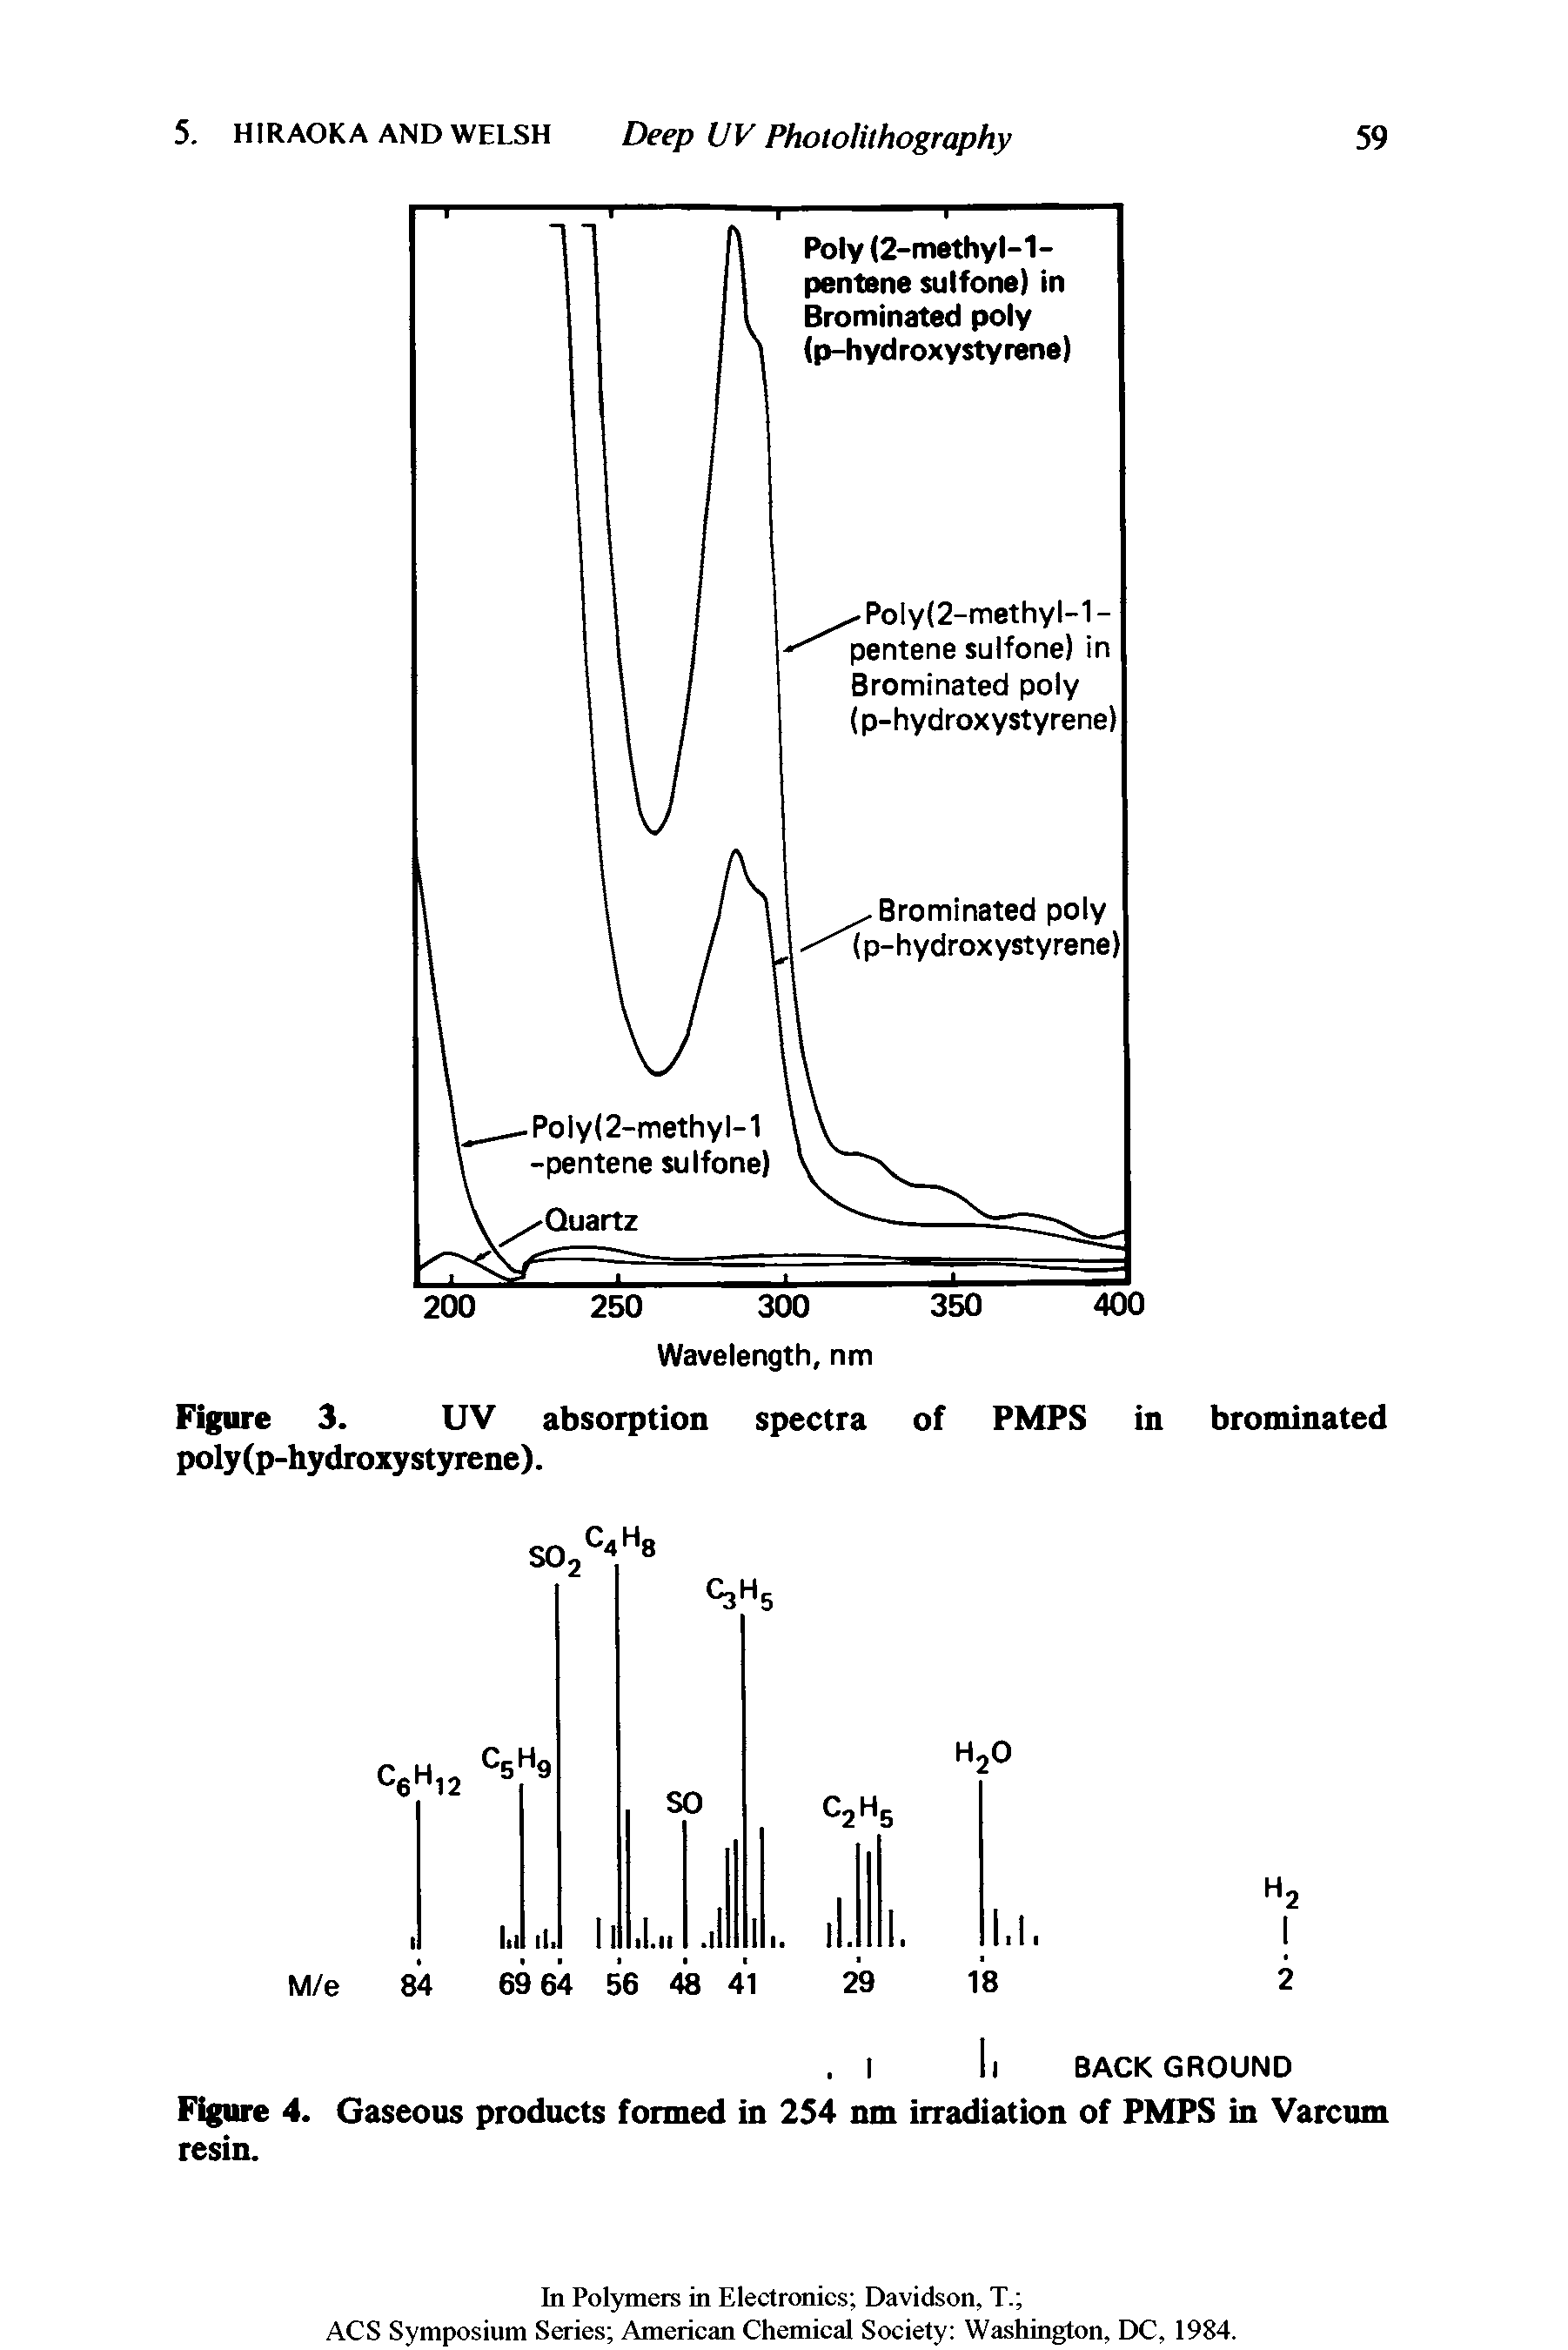 Figure 3. UV absorption spectra of PMPS in brominated poly(p-hydroxystyrene).